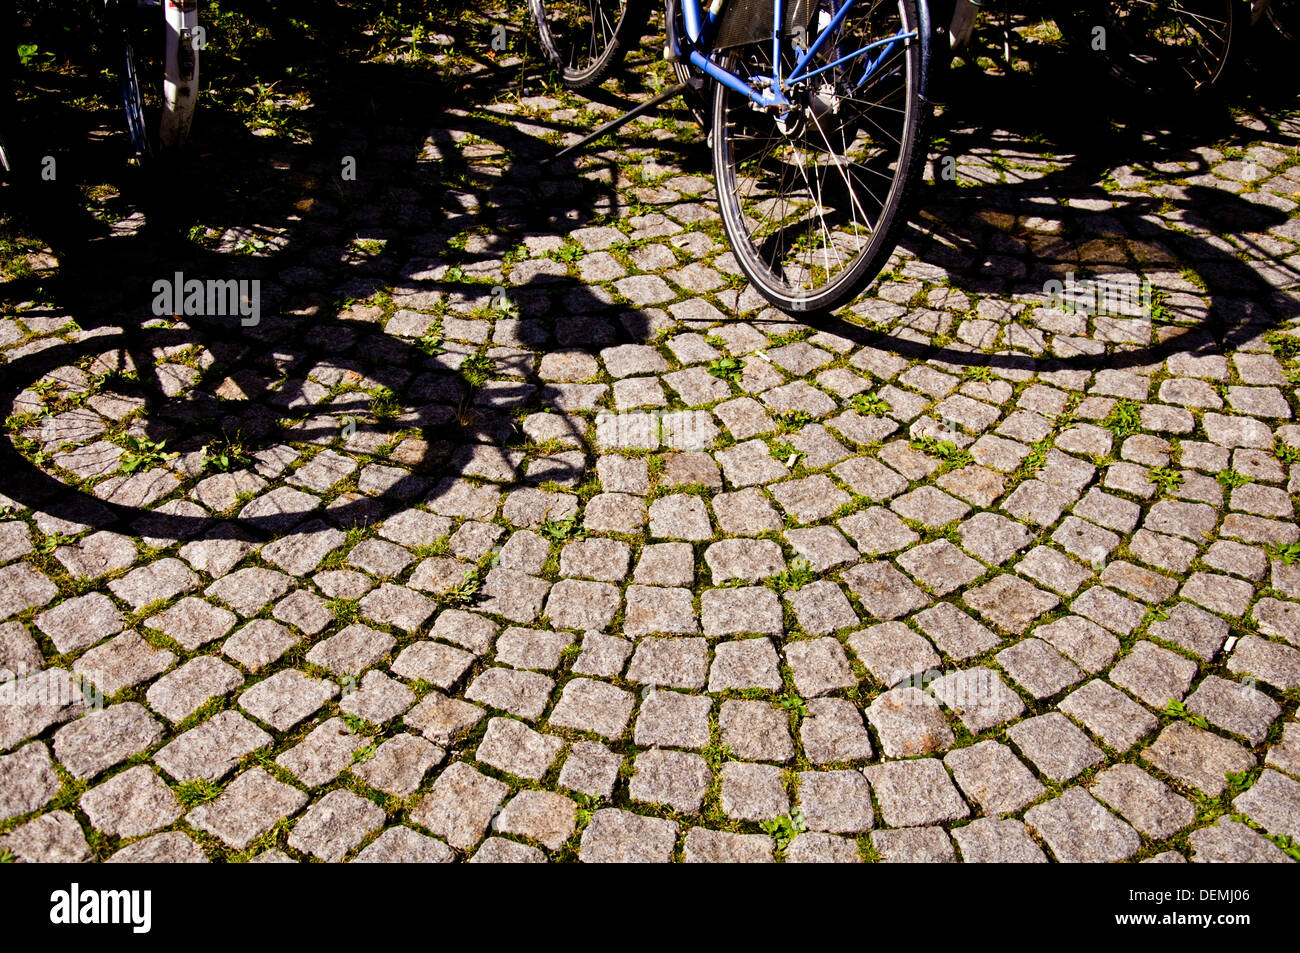 Shadow of bicycles on cobblestone street in Maastricht Netherlands Stock Photo